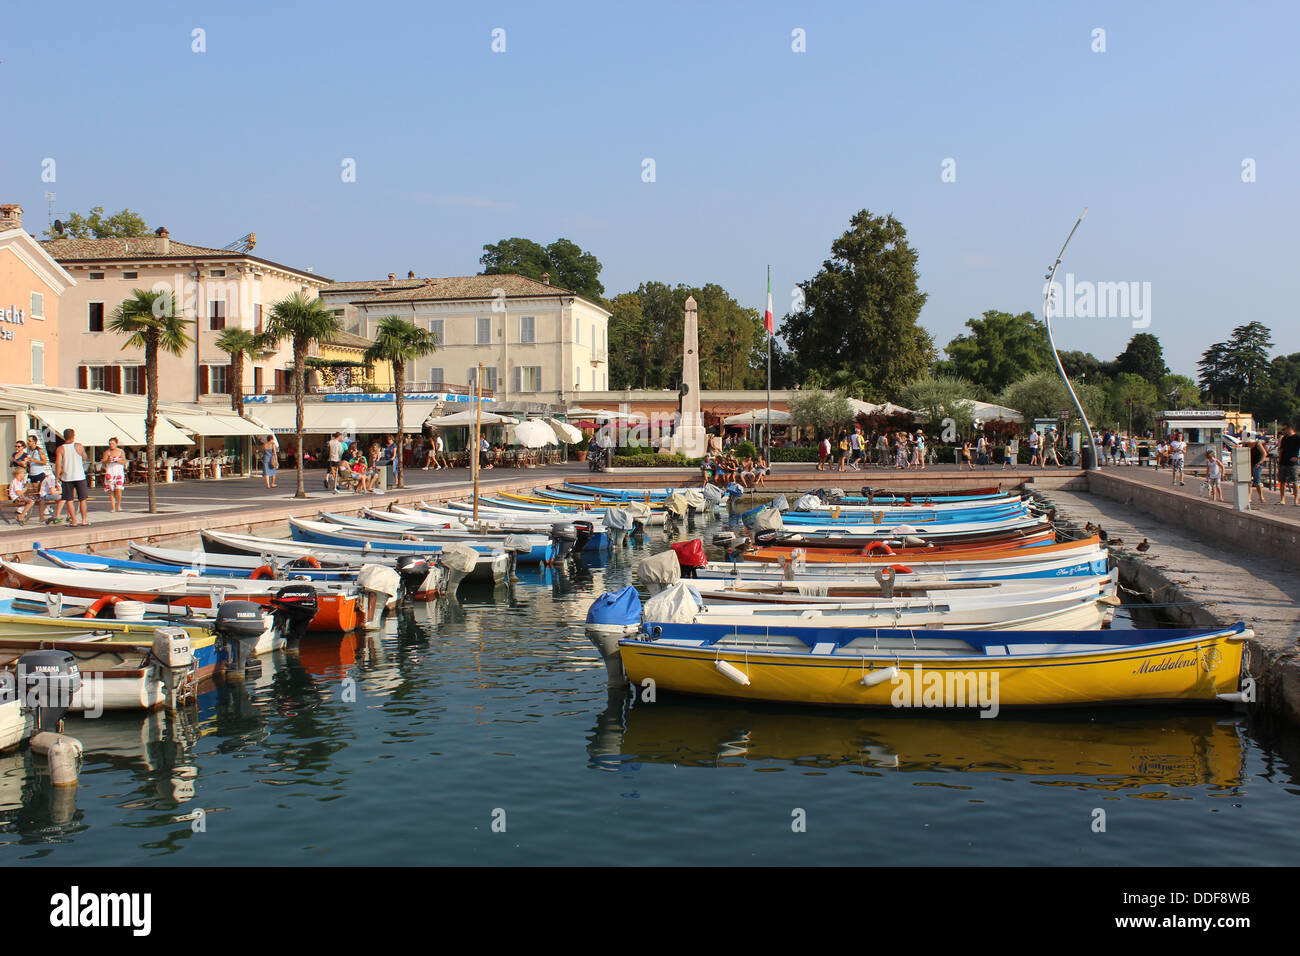 Small boats moored in the harbor at Bardelino on Lake Garda in Italy on a sunny summer day. Stock Photo